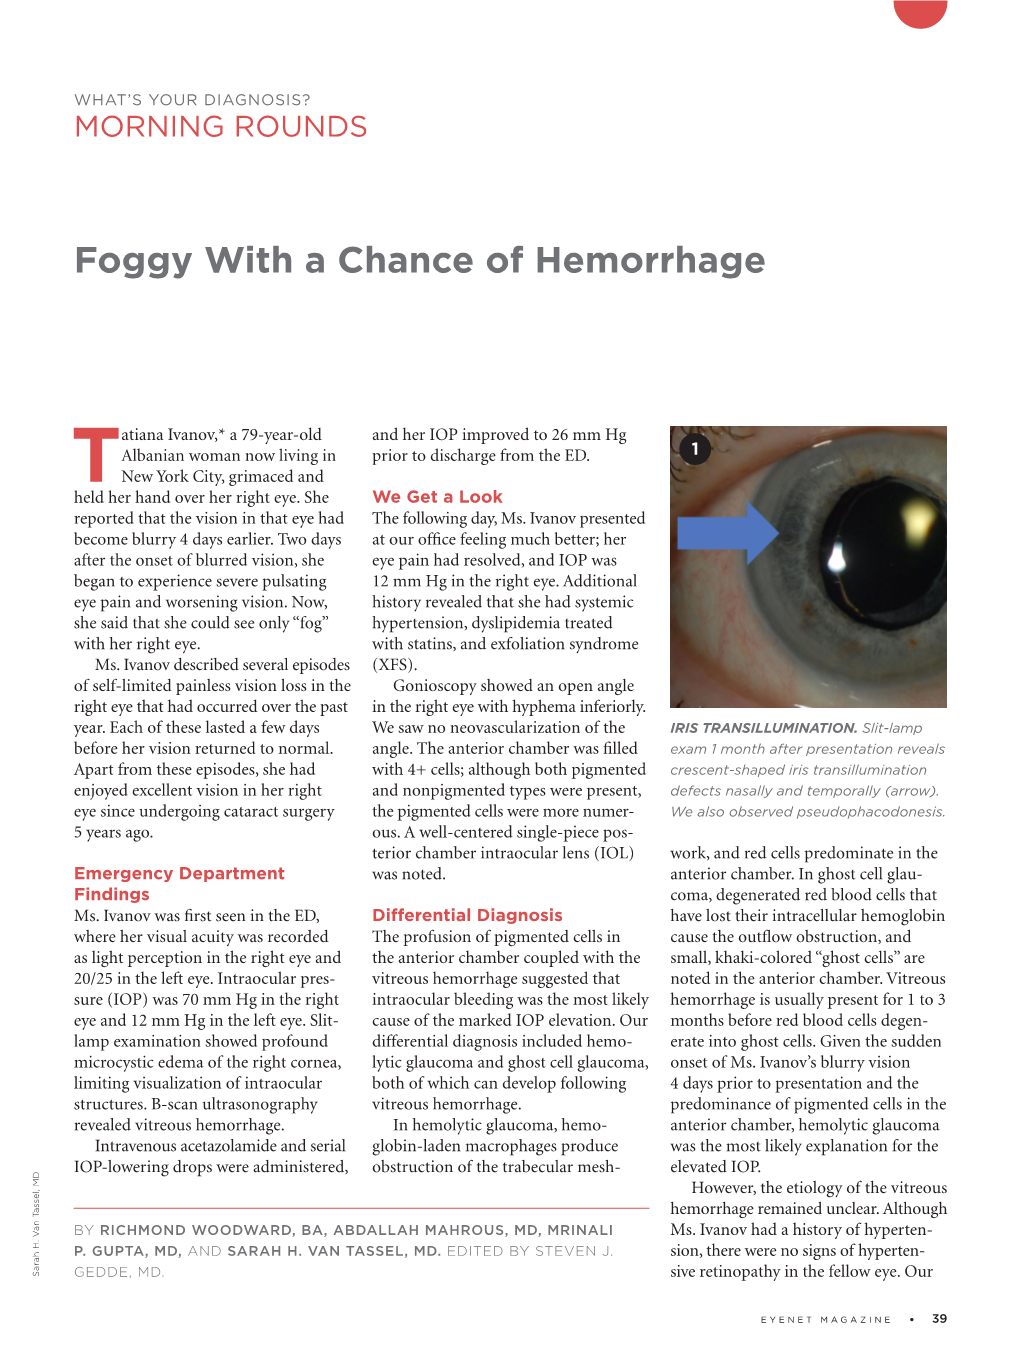 Foggy with a Chance of Hemorrhage